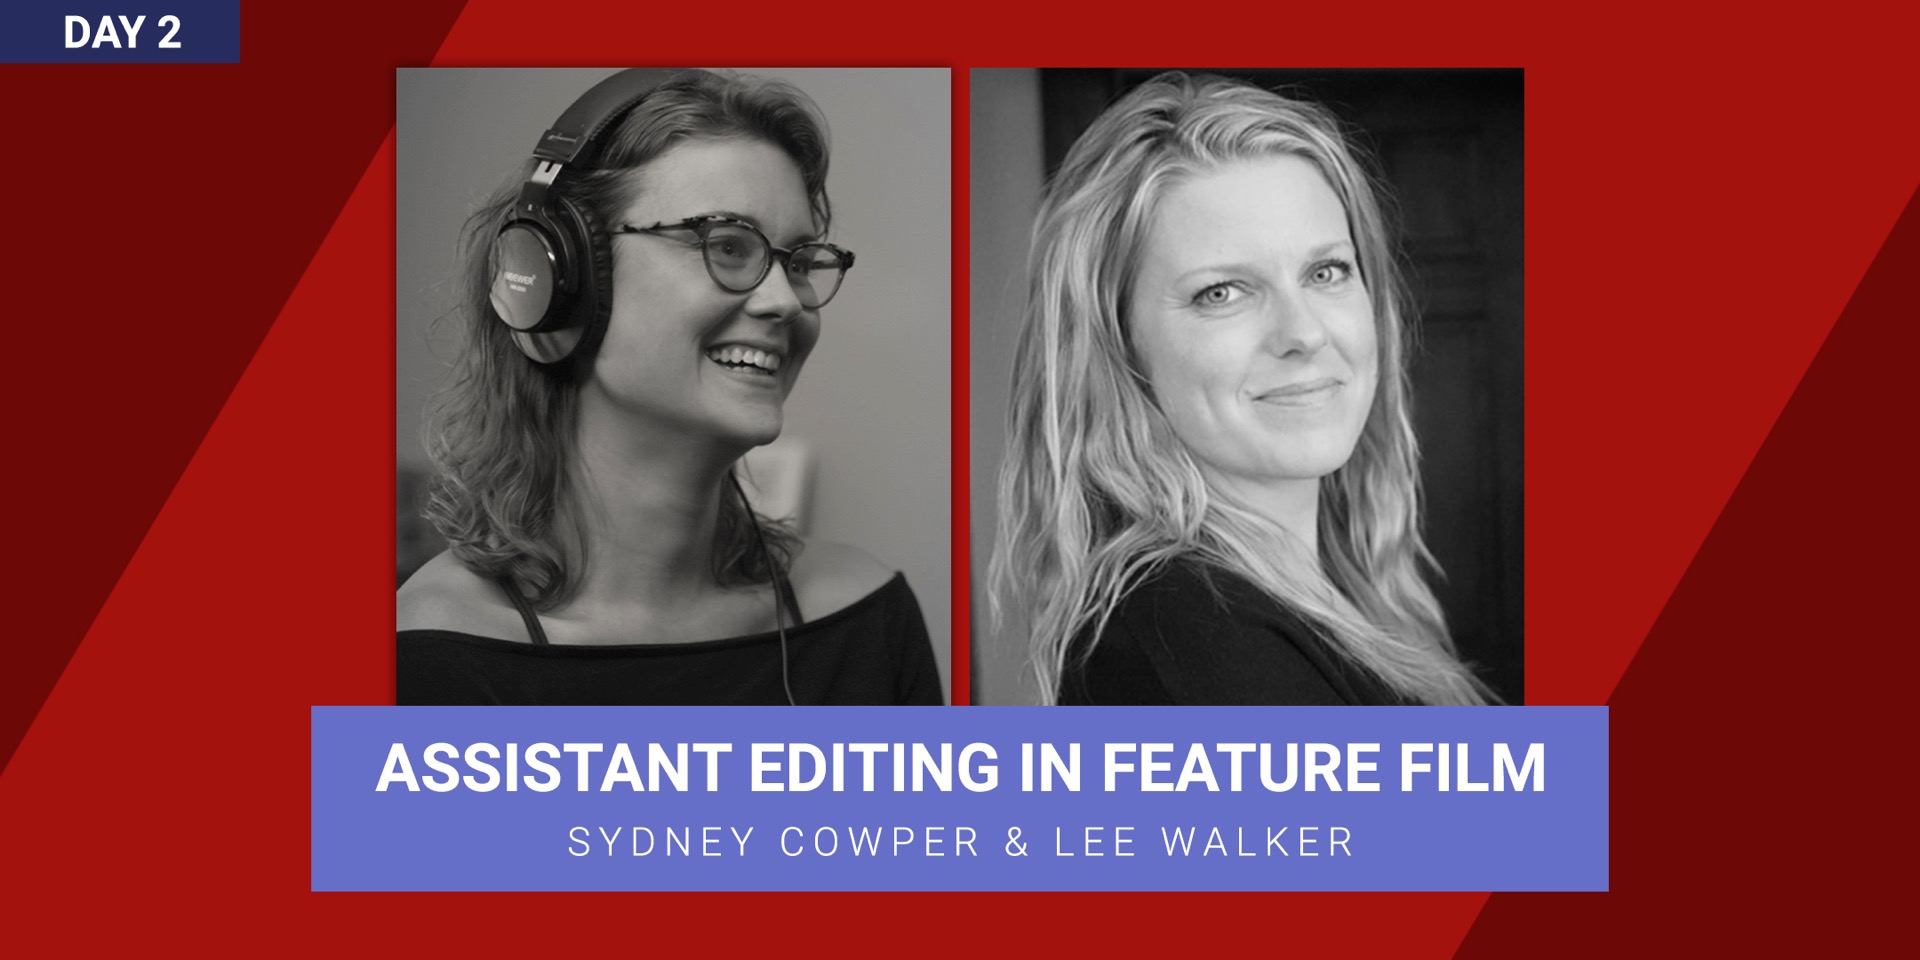 SYDNEY COWPER & LEE WALKER ON ASSISTANT EDITING IN FEATURE FILM EditCon 2021 Breakout Room